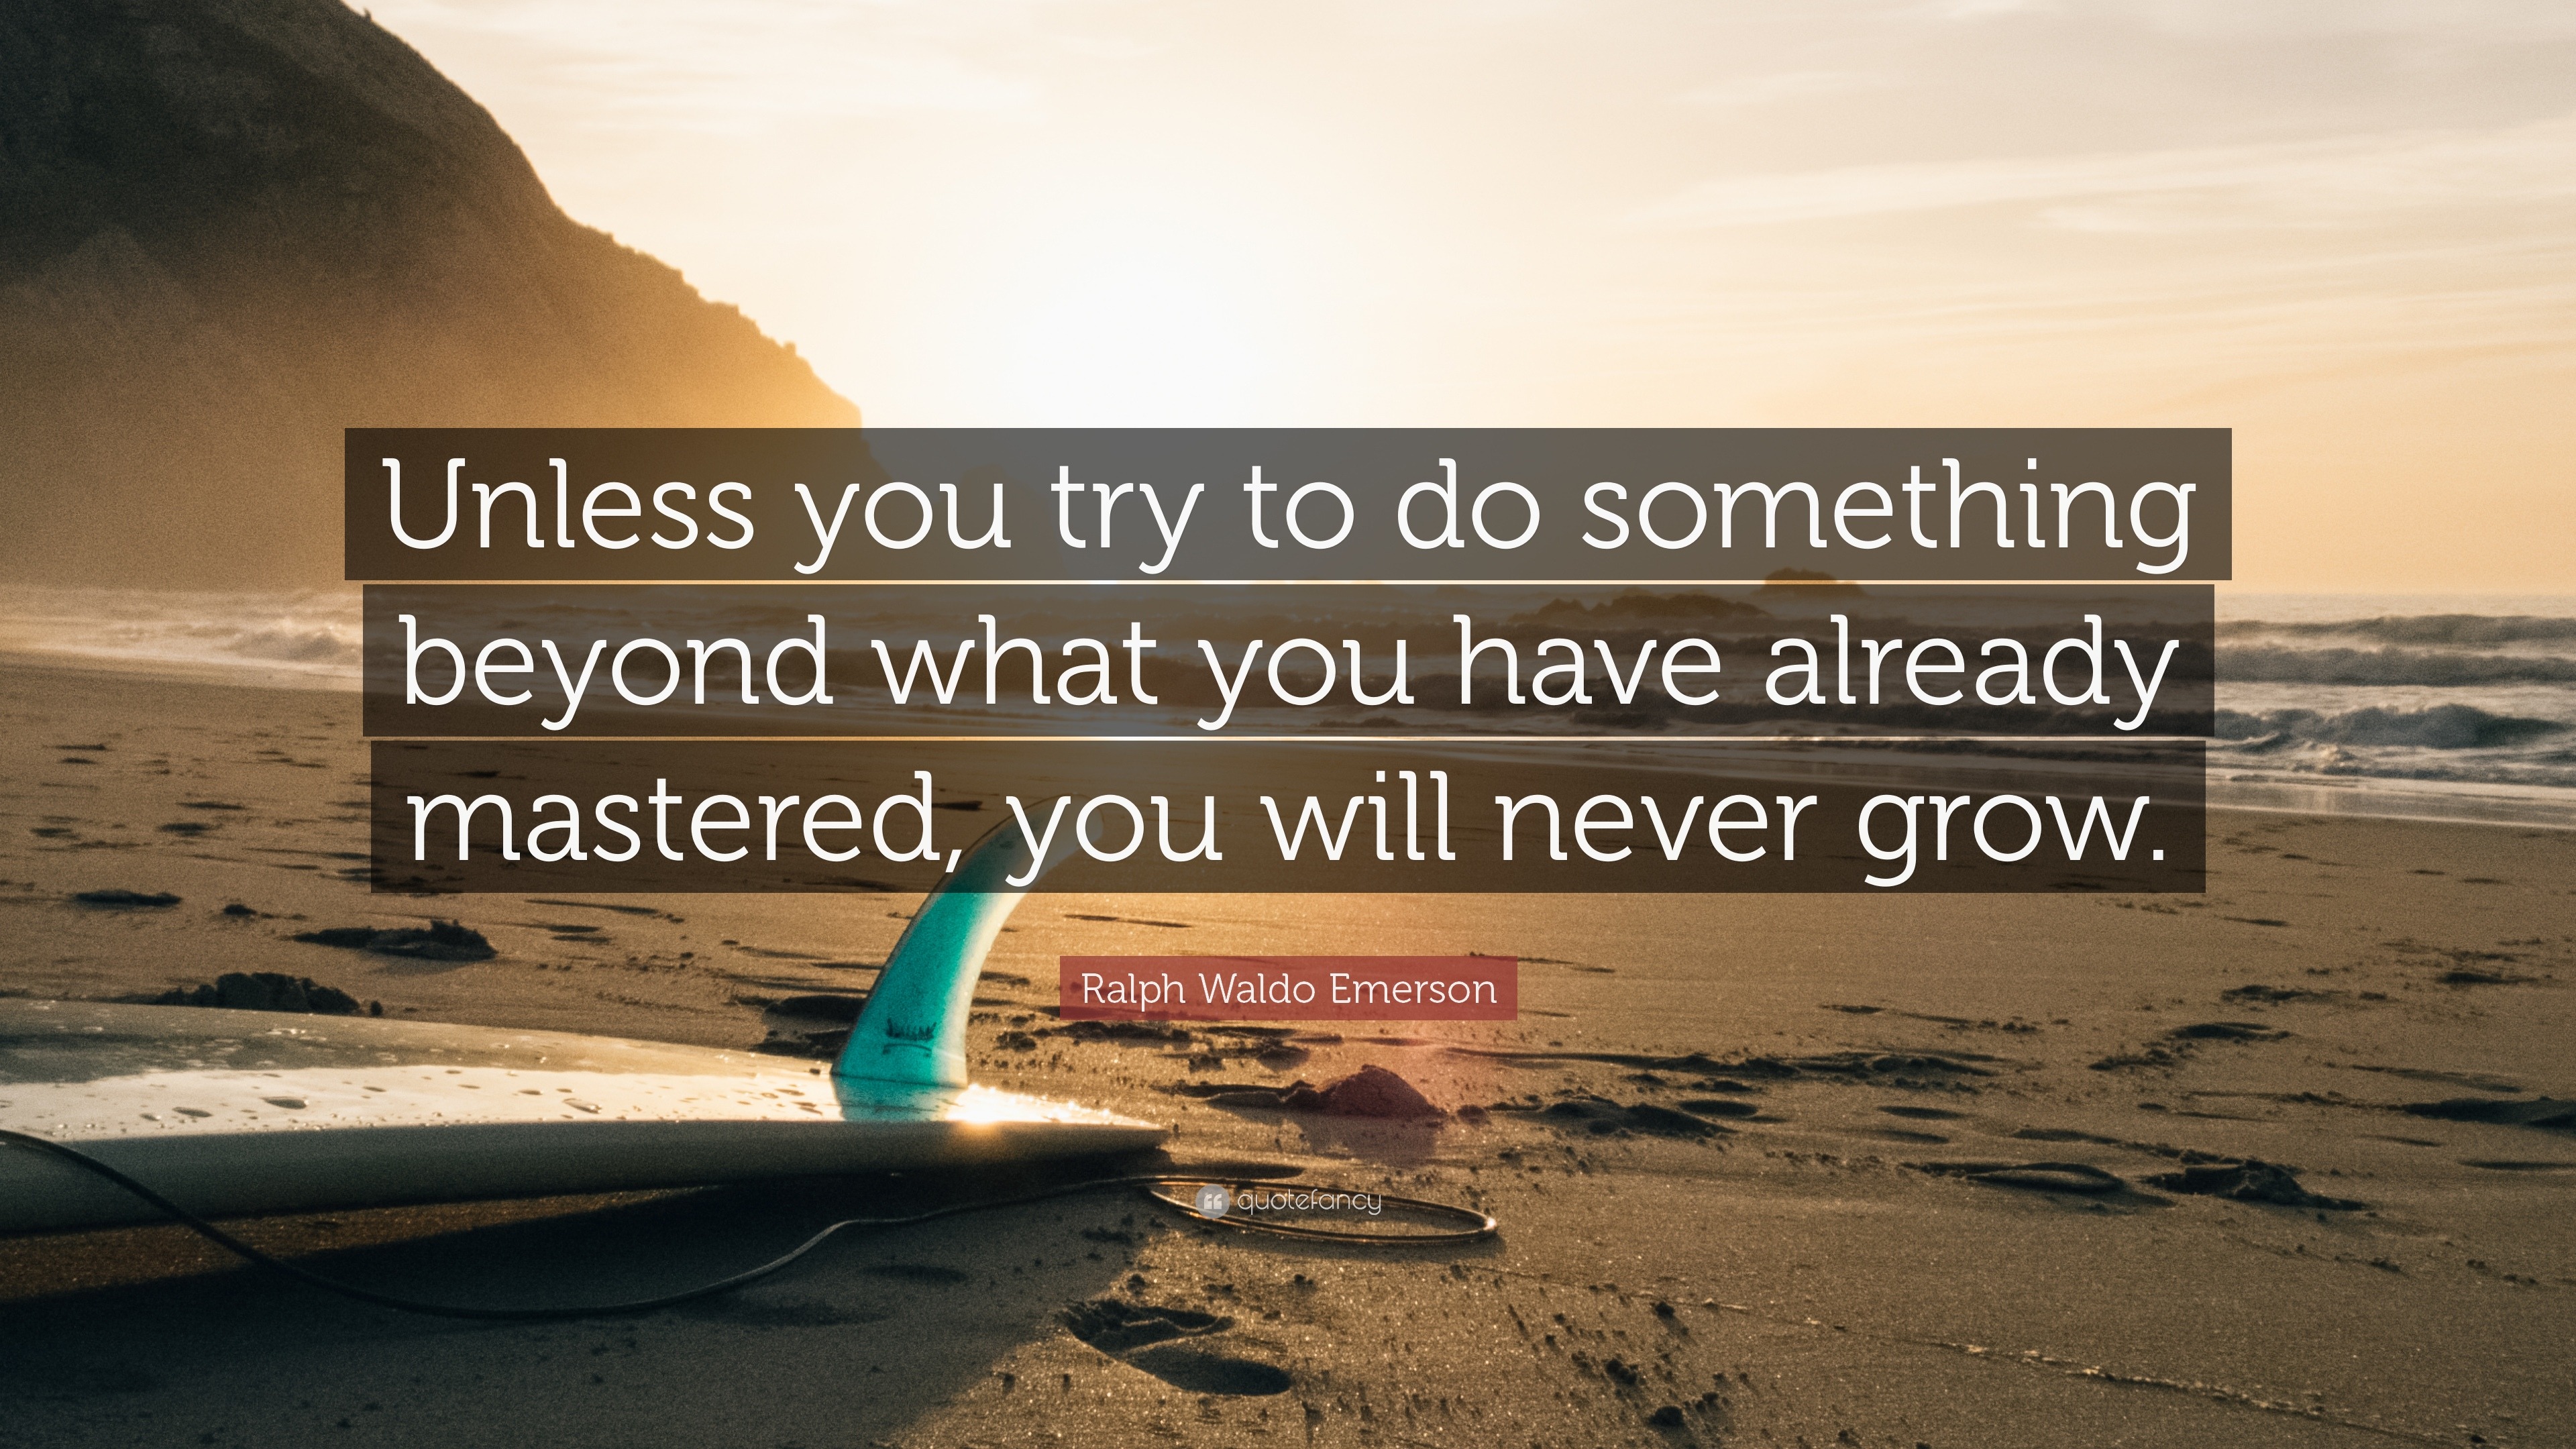 Ralph Waldo Emerson Quote: “Unless you try to do something beyond what ...